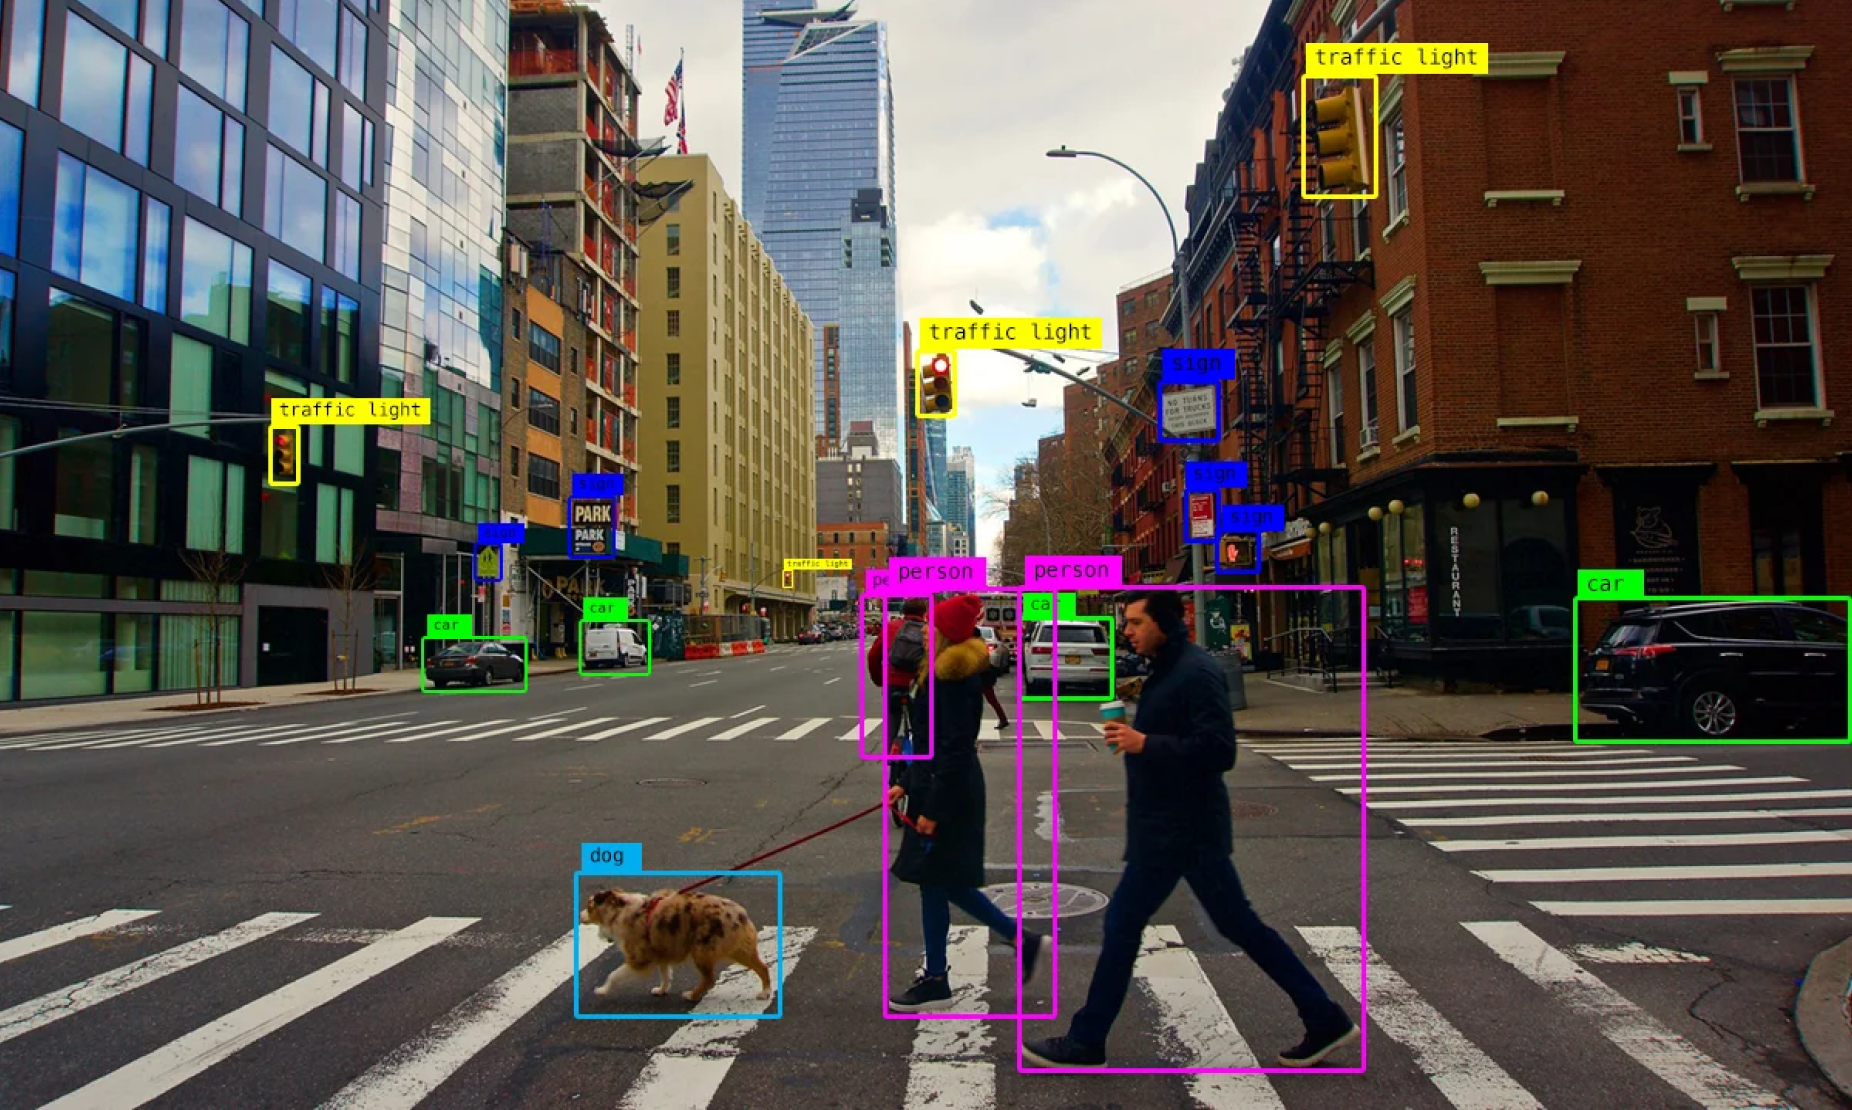 Object detection detects traffic lights, people, cars, street signs, and a dog